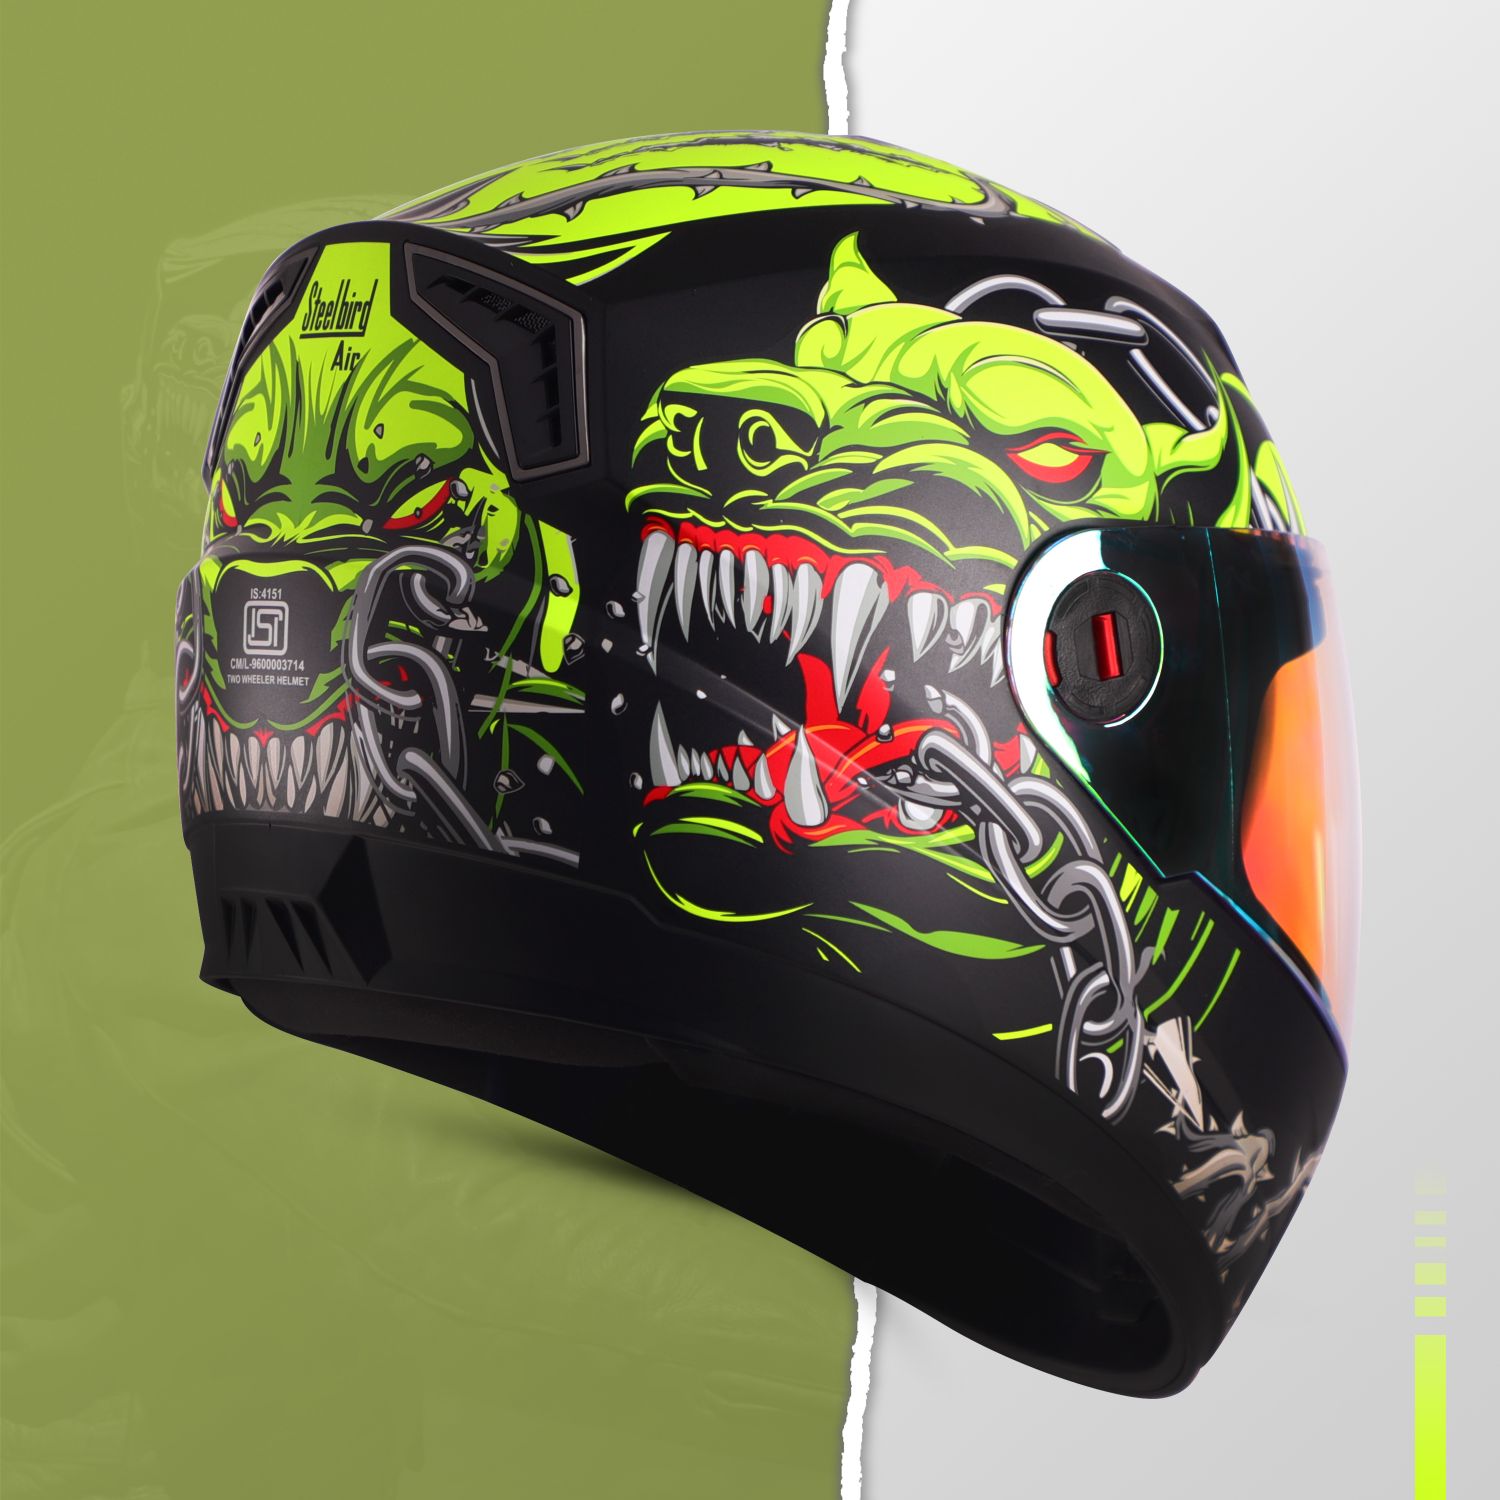 Steelbird SBA-1 Angry Dog ISI Certified Full Face Graphic Helmet For Men And Women (Glossy Black Neon With Night Vision Gold Visor)